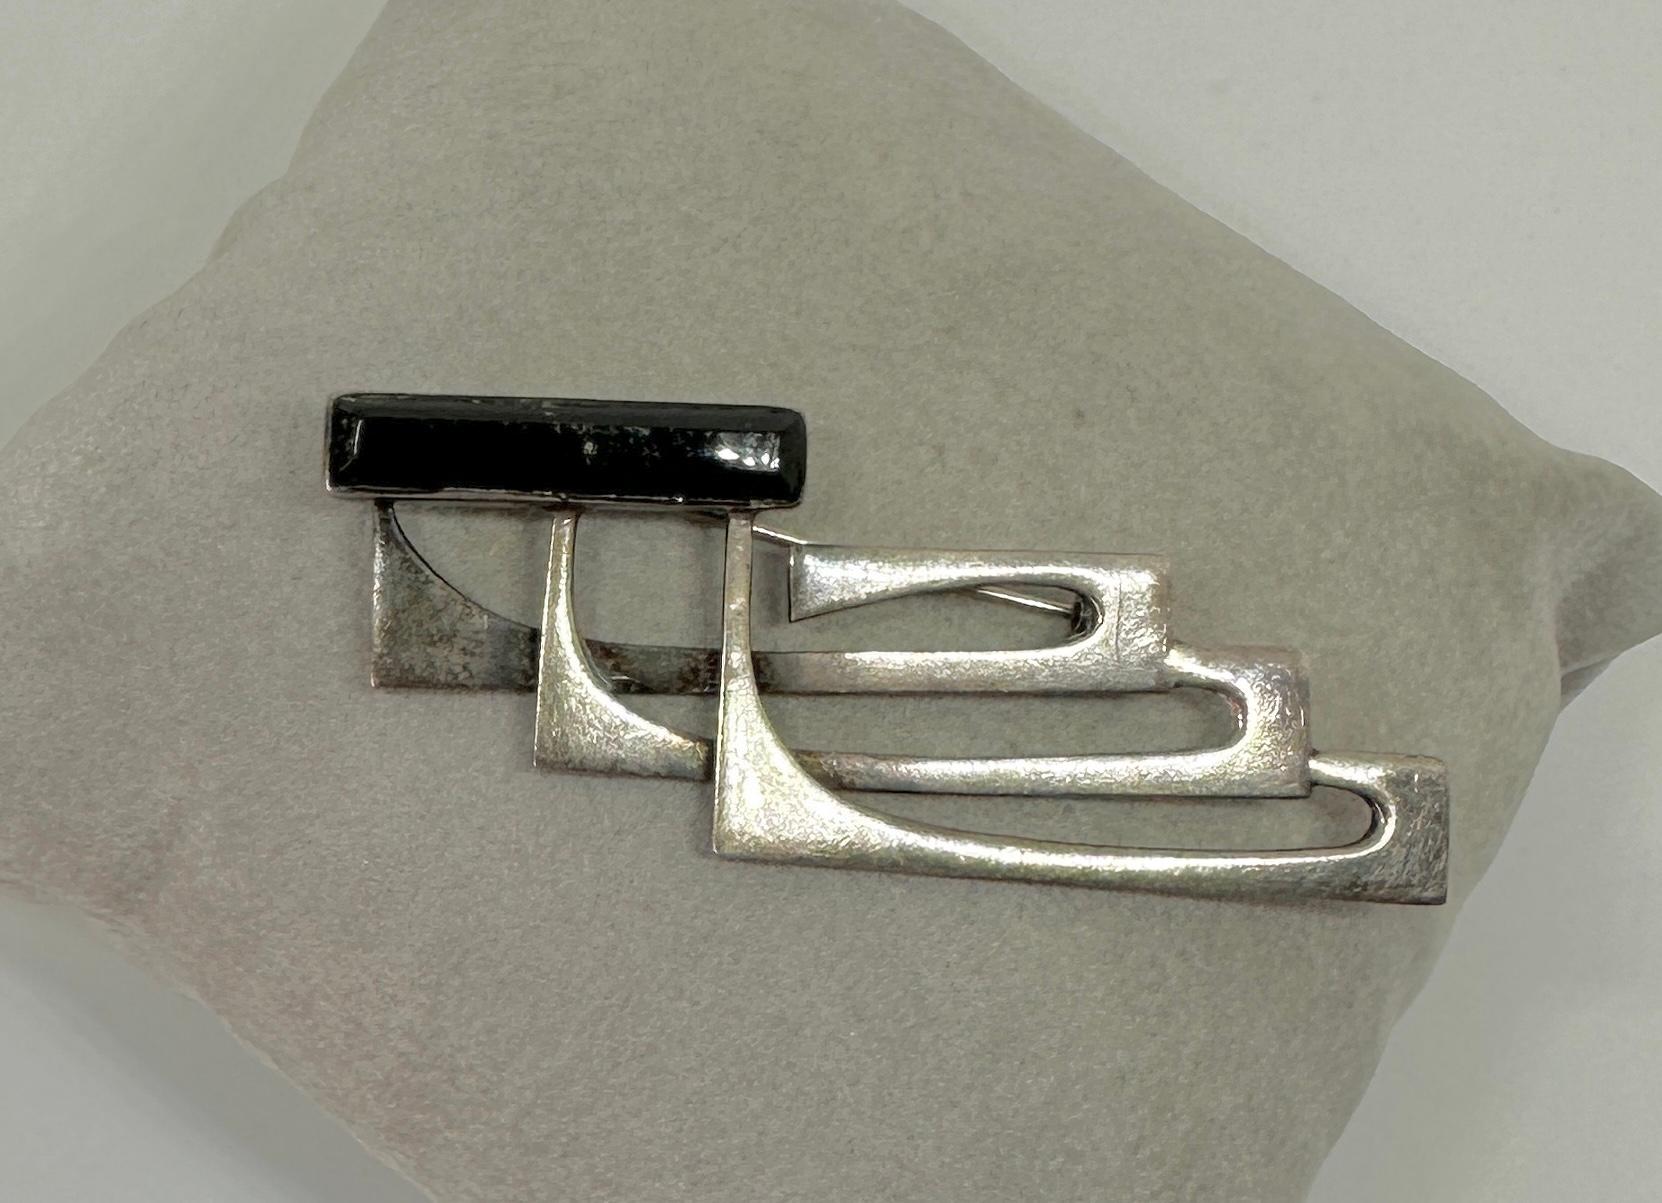 This is a very fine mid-century modern Black Onyx Sterling Silver brooch by Sigi Pineda of Mexico.  Signed Sigi Taxco Sterling and numbered 416 I believe. The Mexican sterling silver modernist brooch is a masterpiece of mid-century design with the